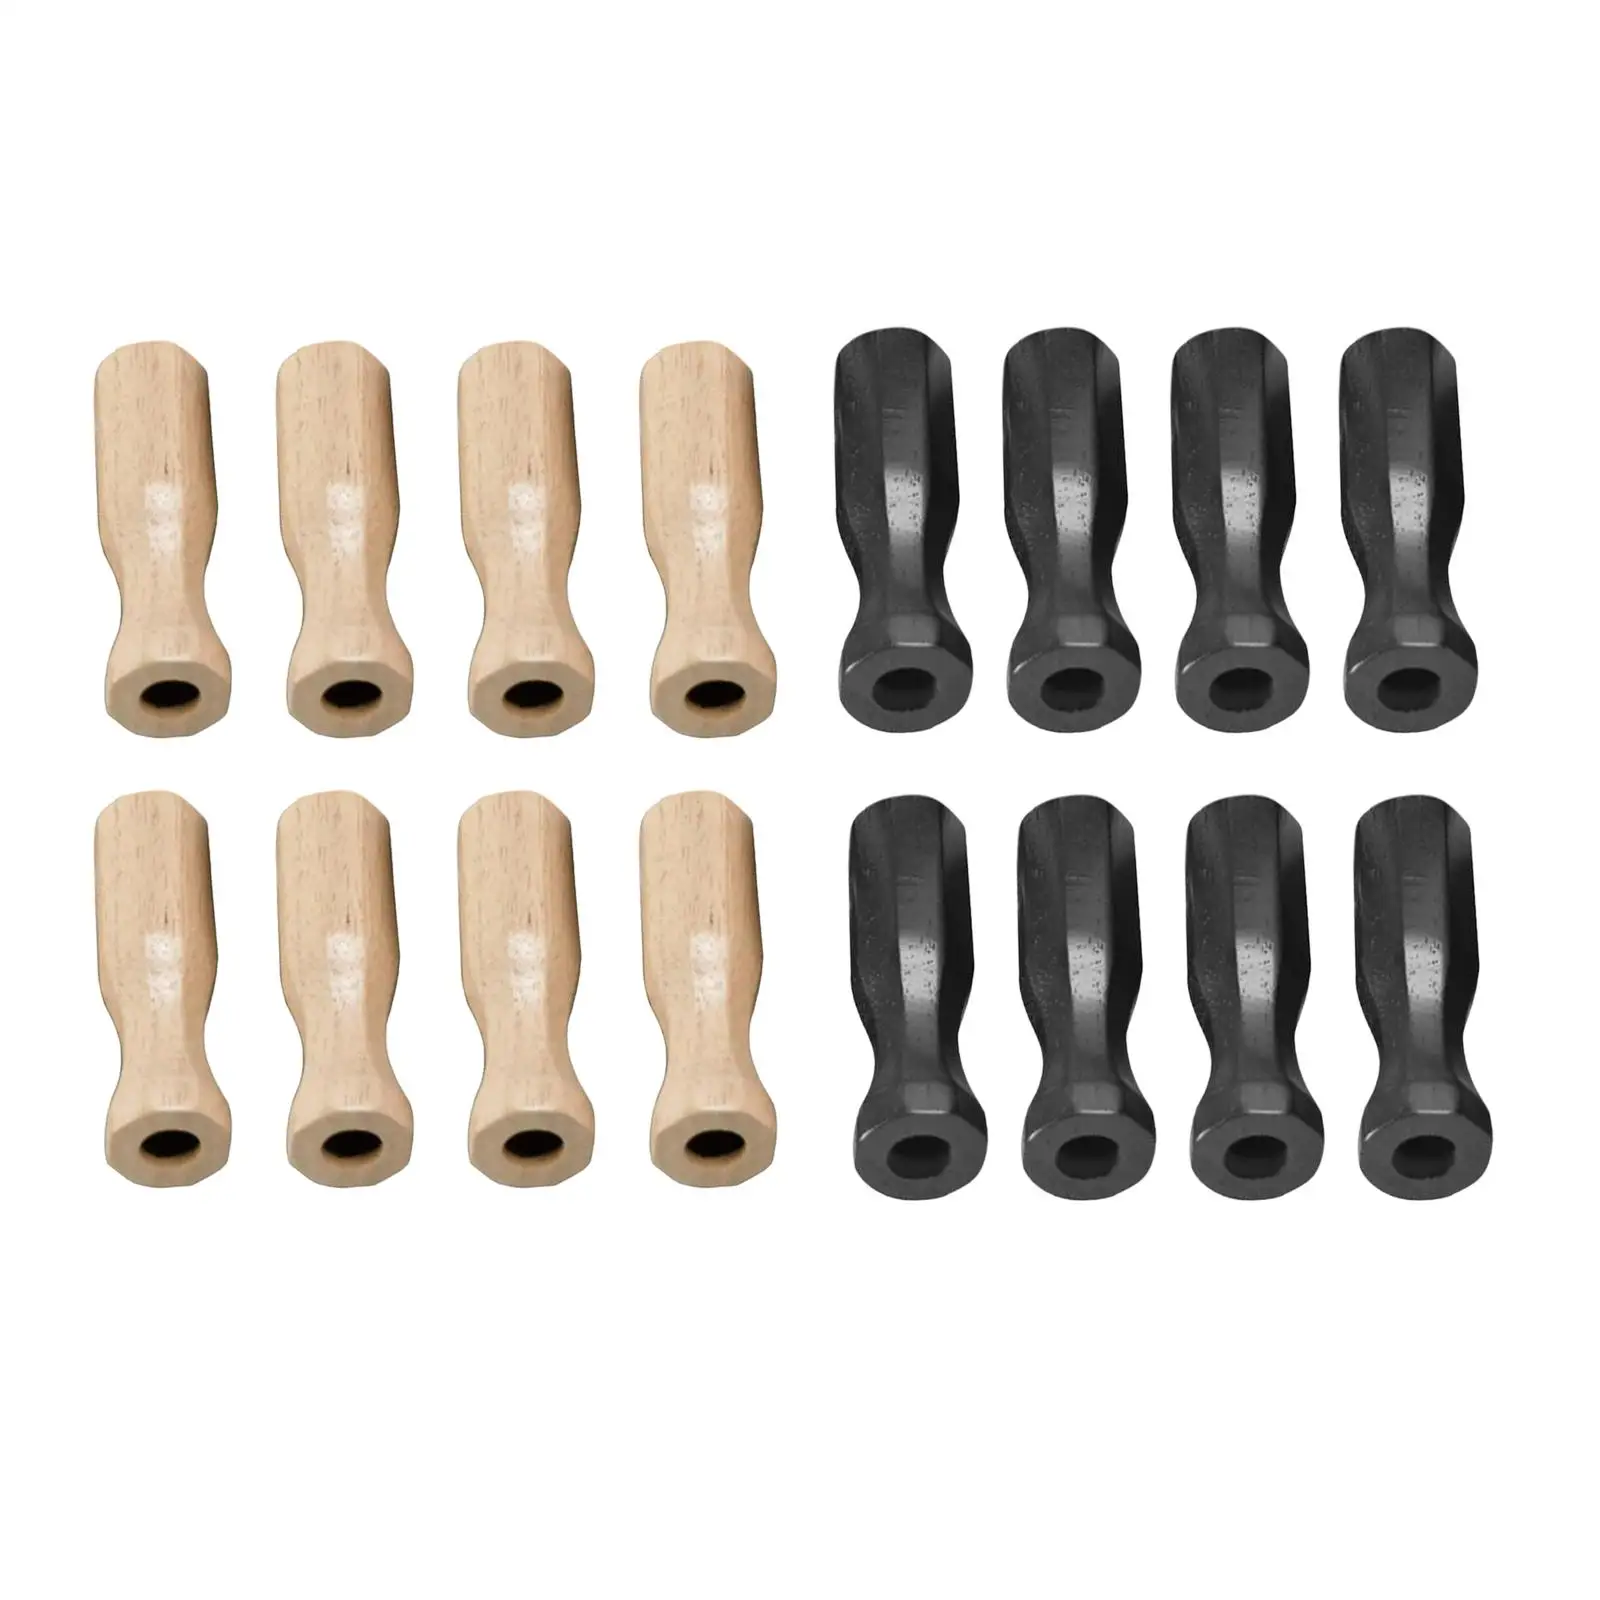 8Pcs Soccer Table Handles Foosball Handle Grip Non Slip, Portable Replacements for Children Soccer Machine Table Soccer